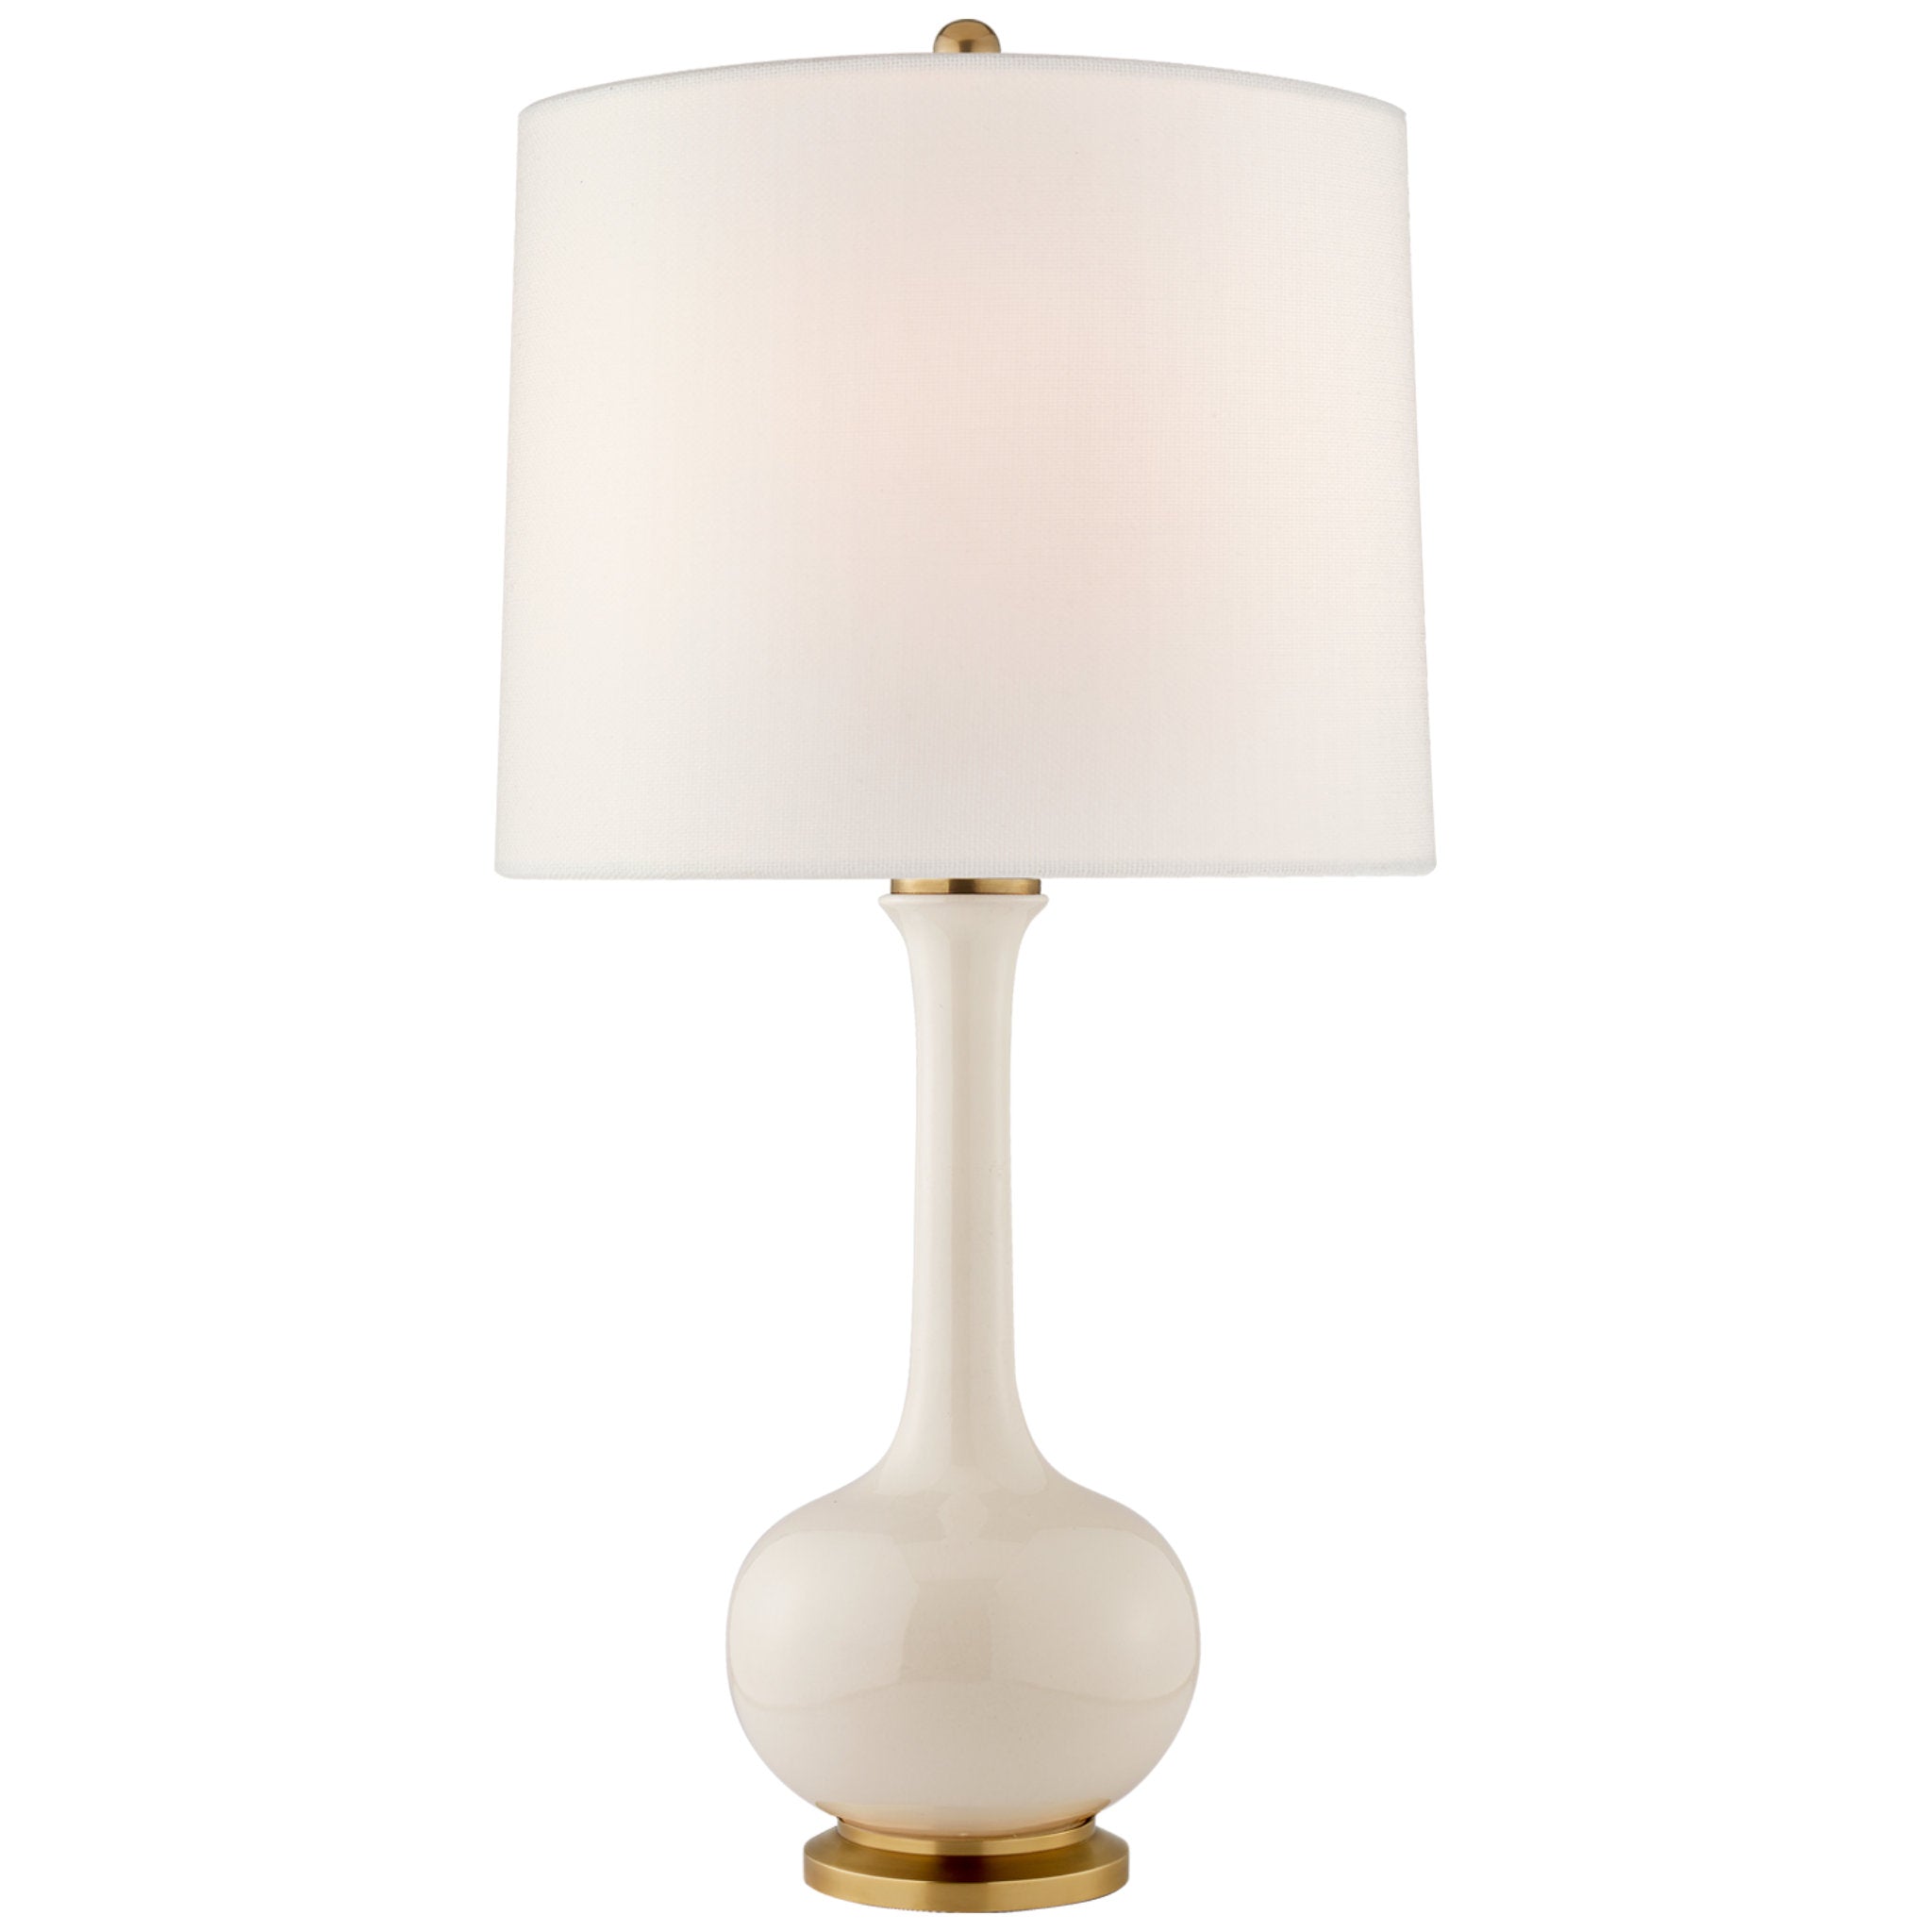 Christopher Spitzmiller Coy Medium Table Lamp in Ivory with Linen Shade